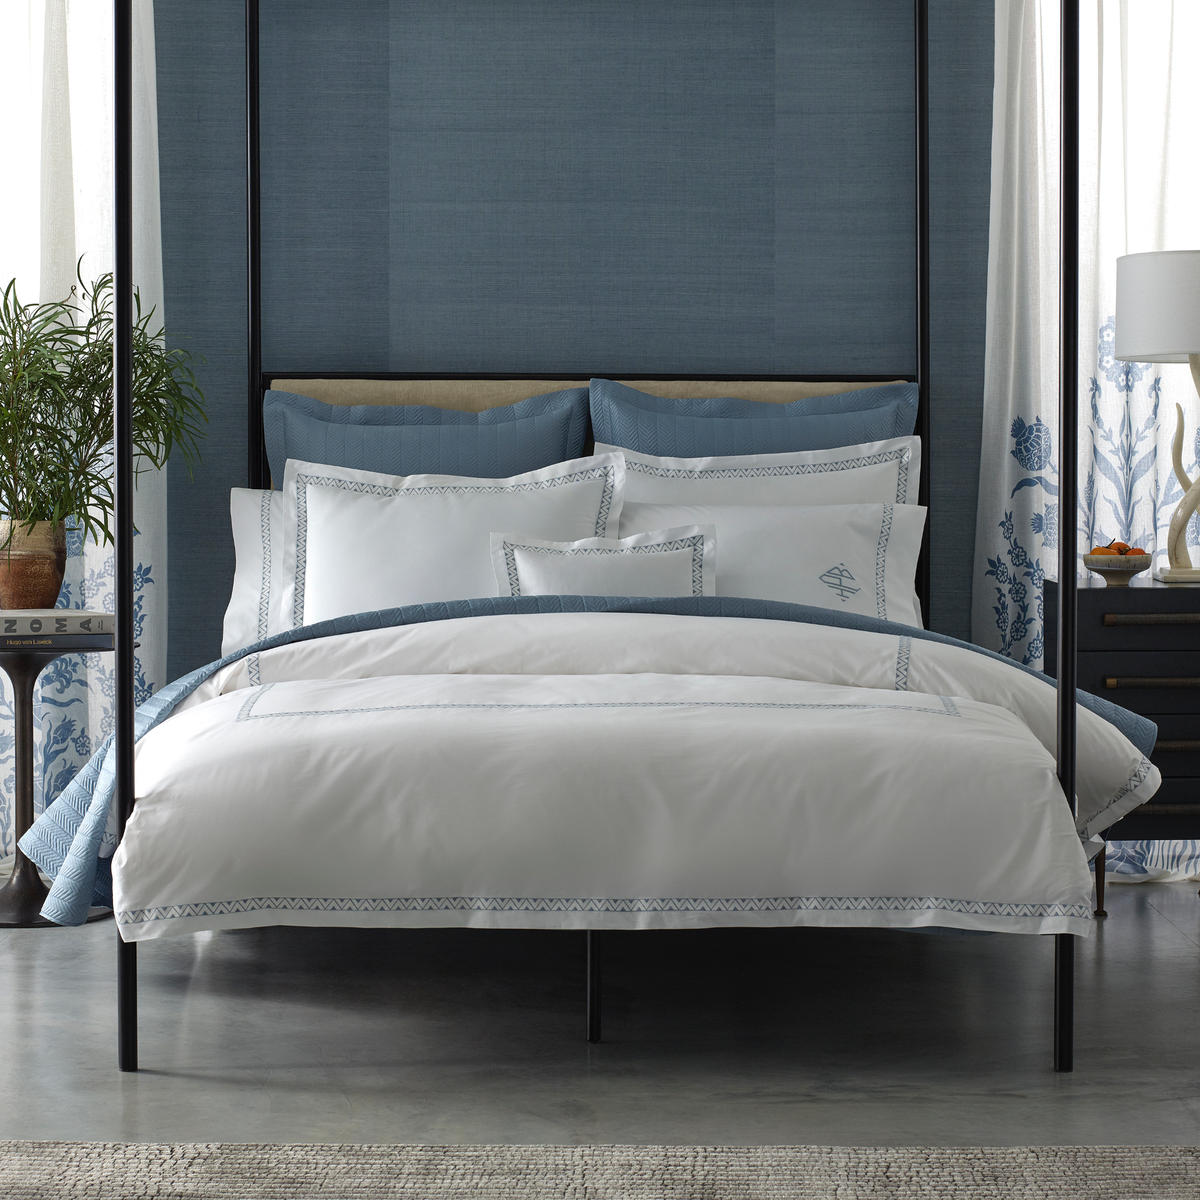 Full Bed Coordinated with Matouk Netto and Prado Bedding both in Hazy Blue Color